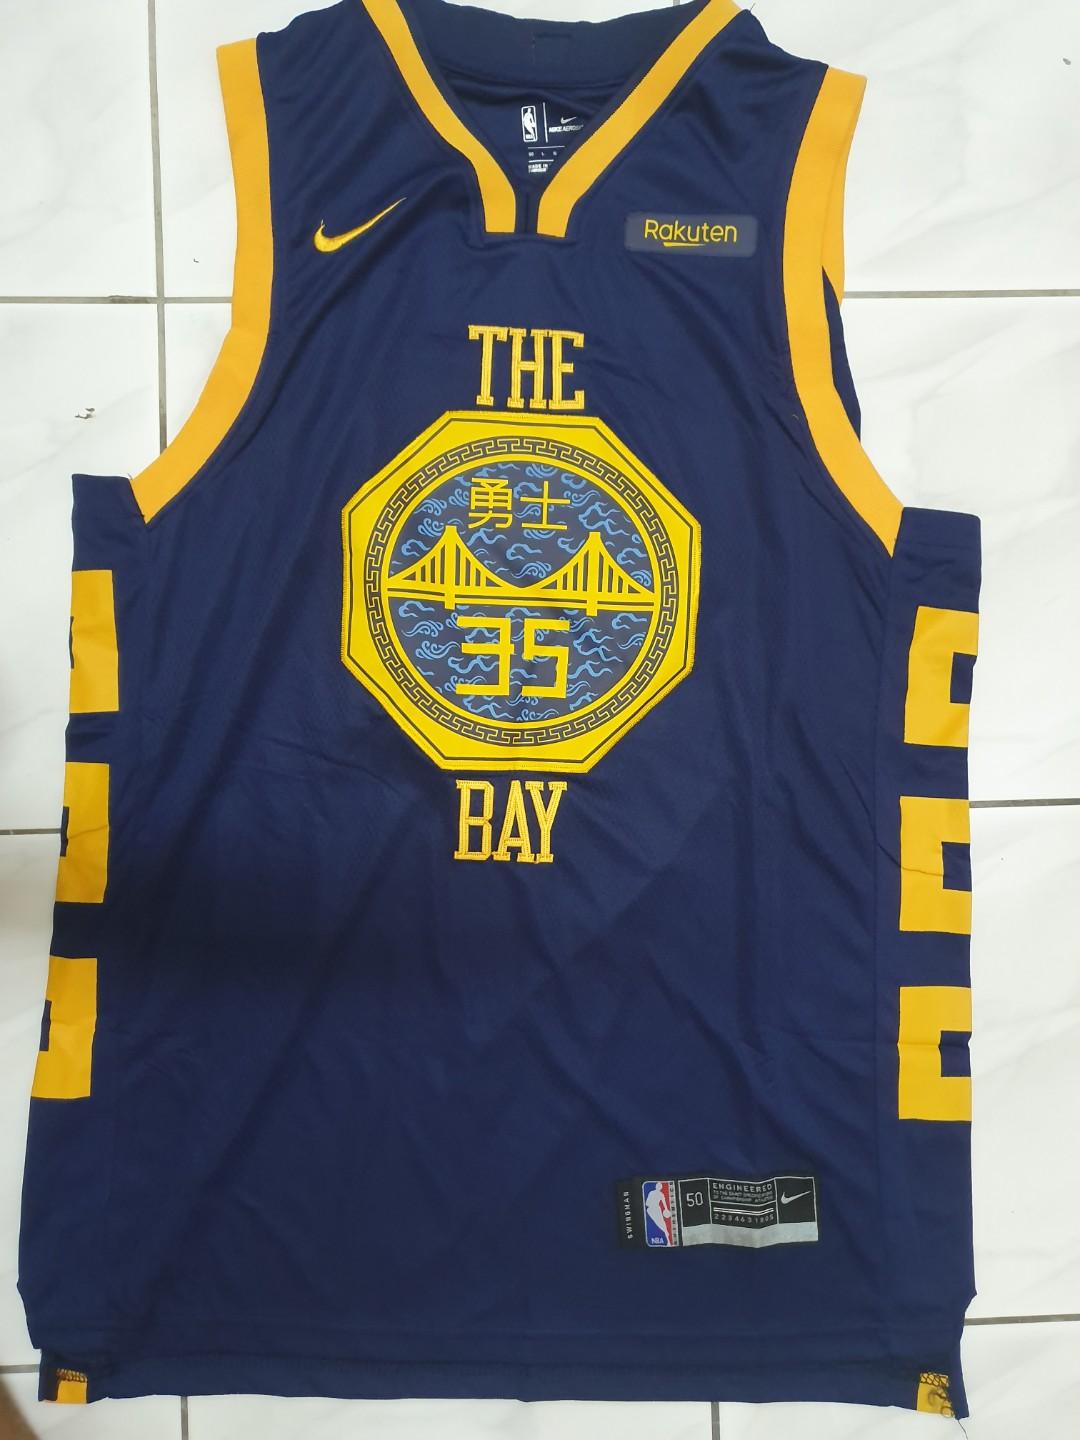 kevin durant yellow warriors jersey